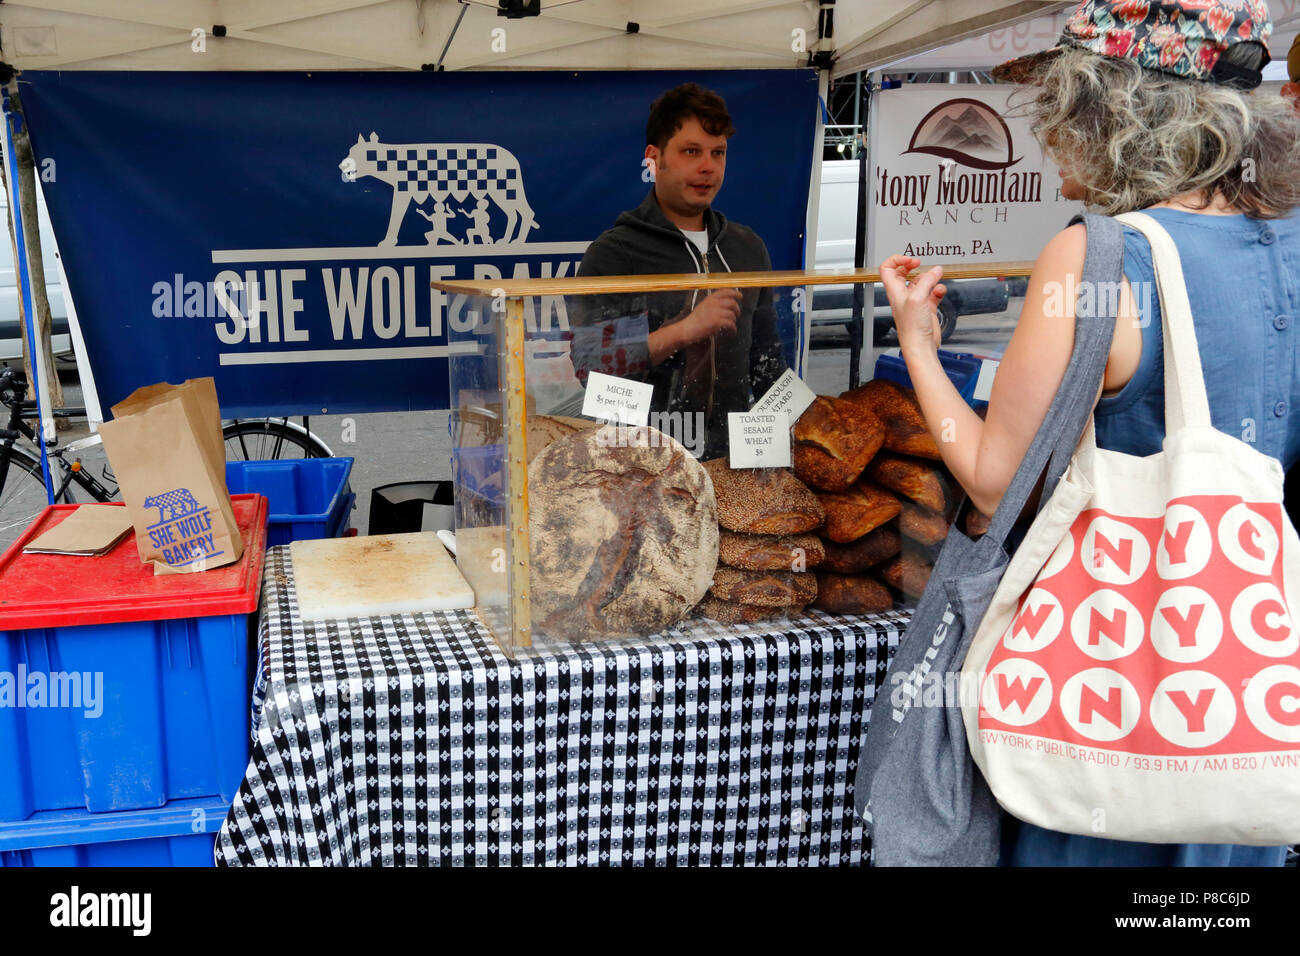 She Wolf Bakers at the Union Square Greenmarket Stock Photo